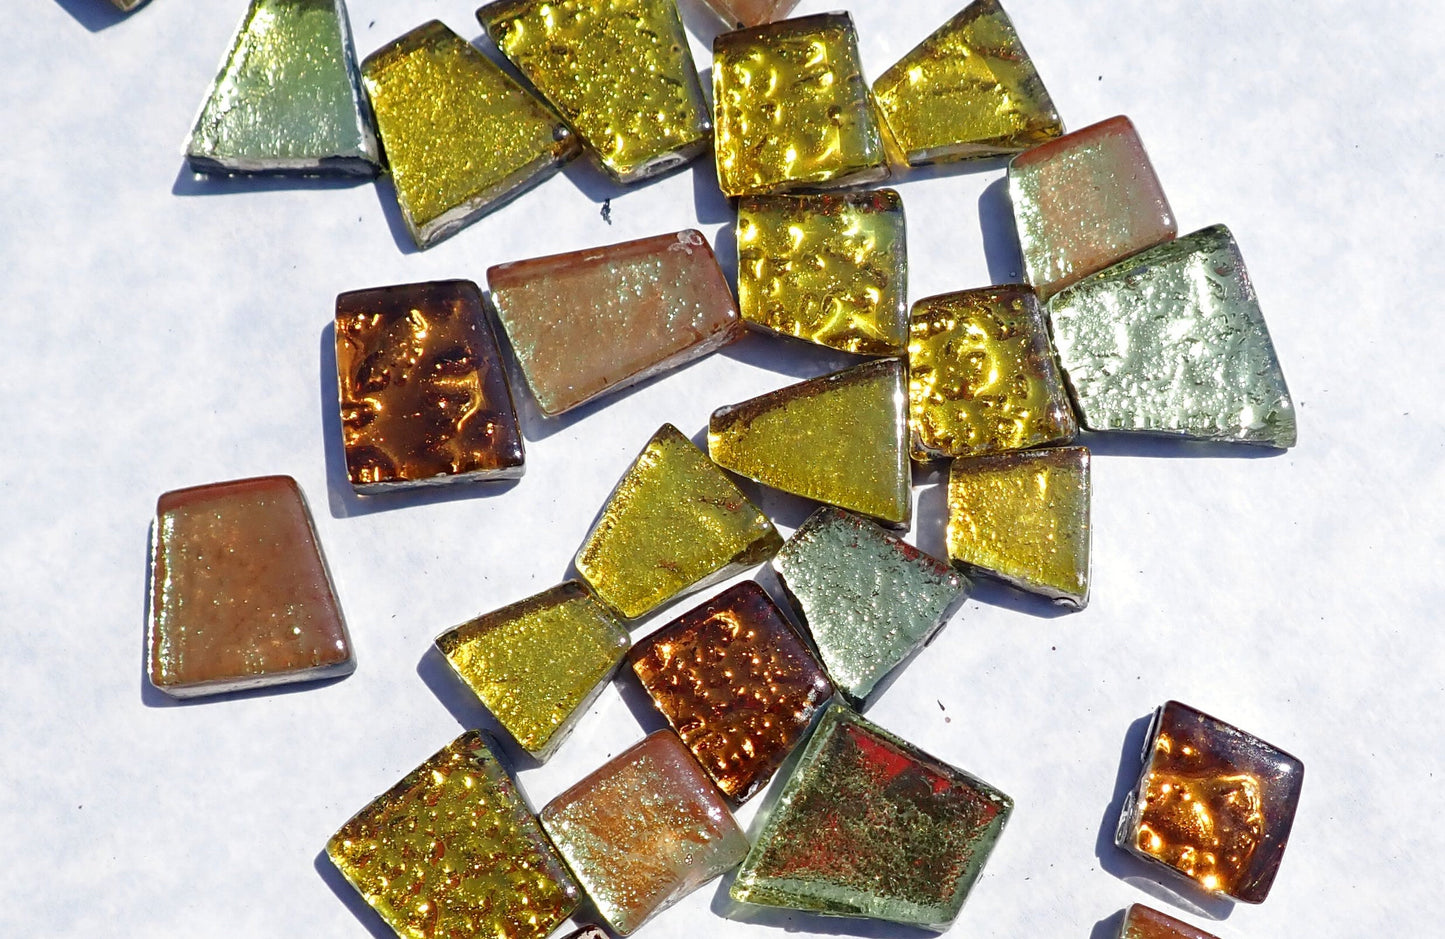 Gold and Bronze Glass Tiles - Metallic Foil - Assorted Shapes - 50 grams Mosaic Tiles - Ganymede Gold